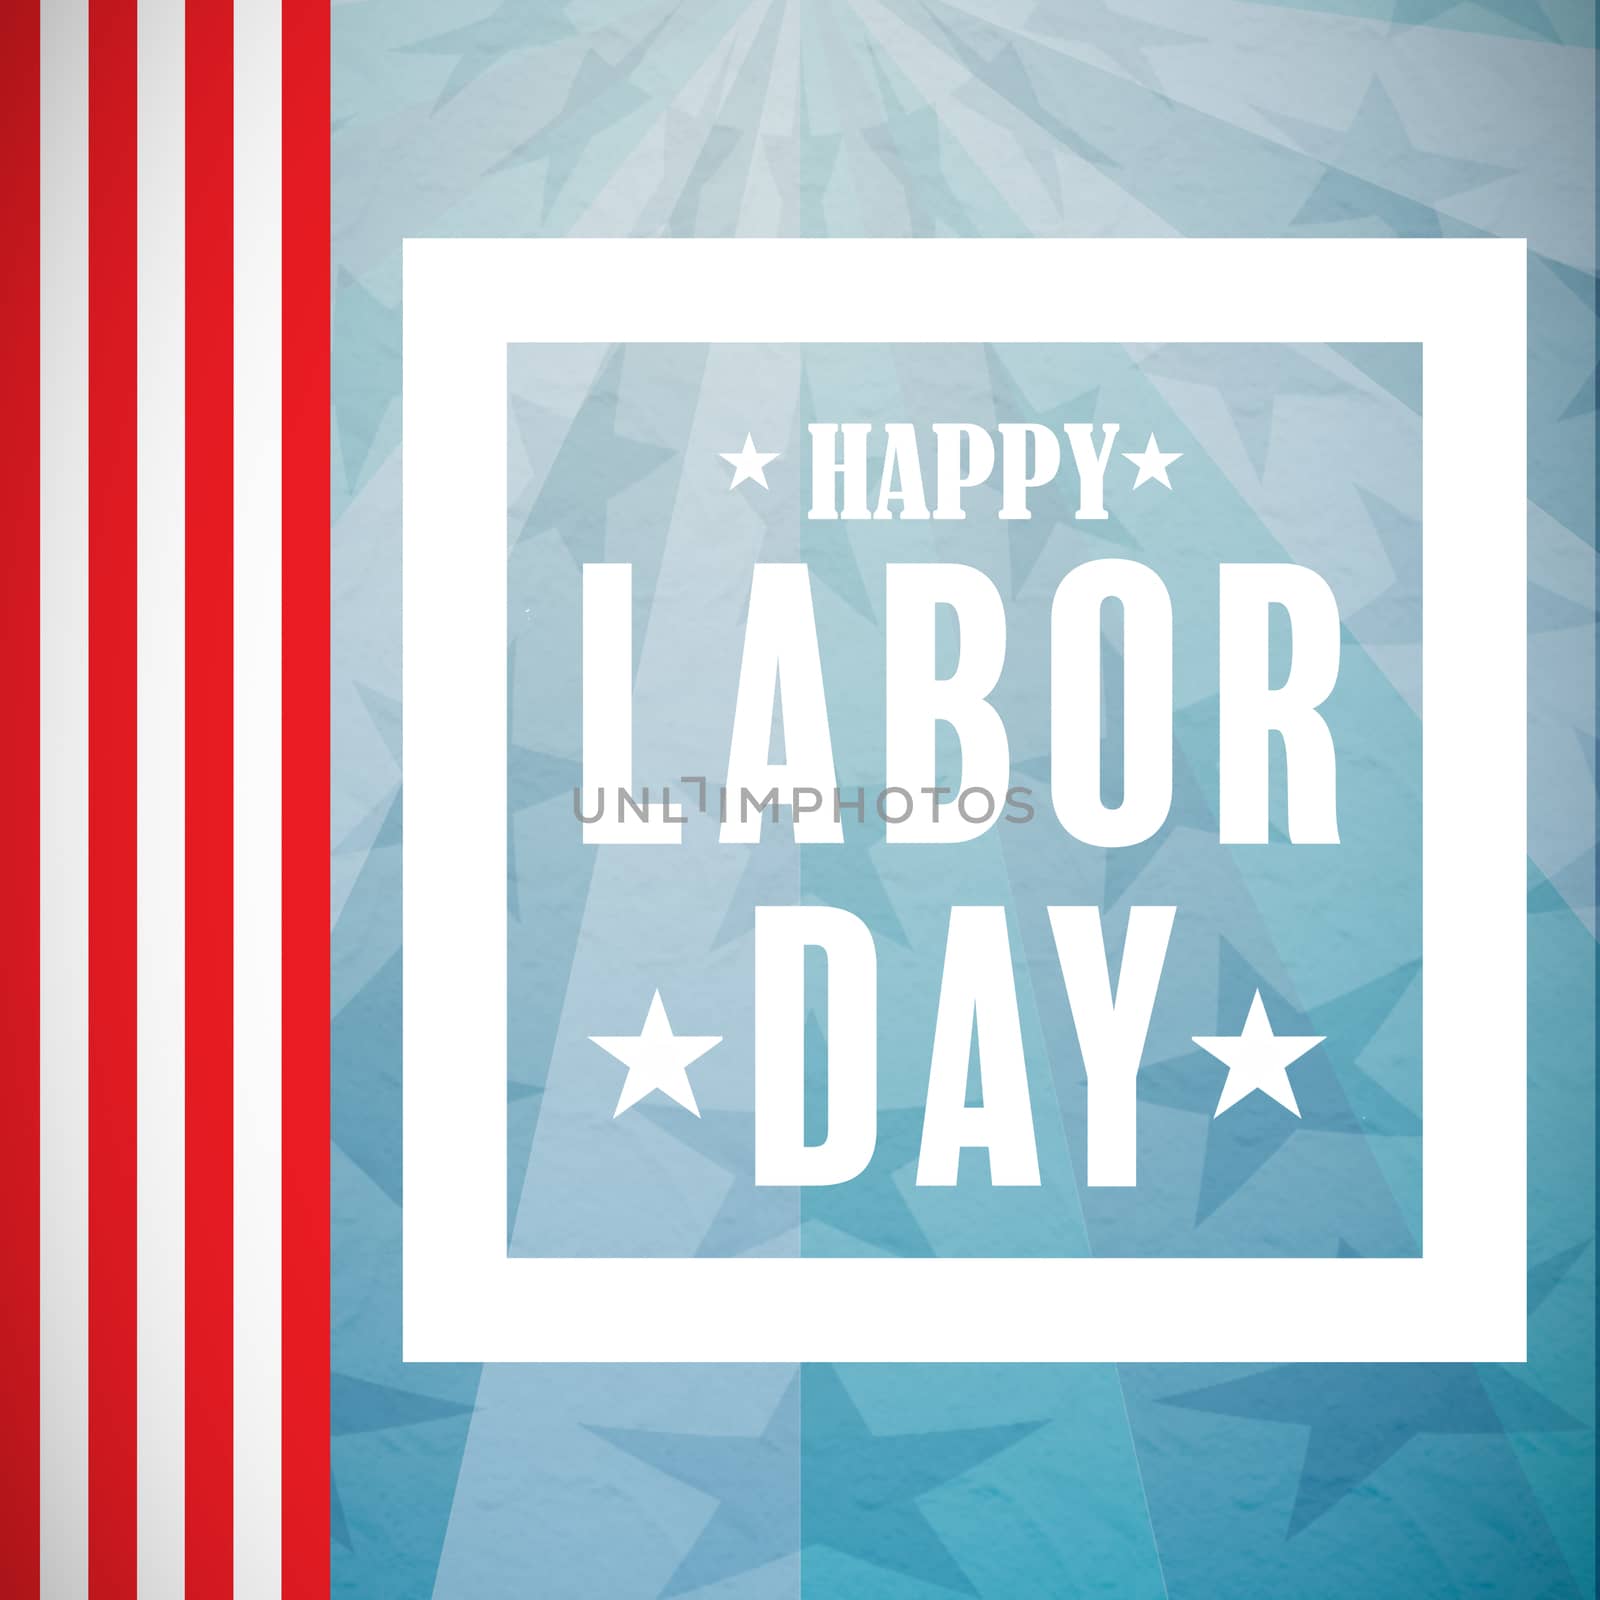 Composite image of composite image of happy labor day poster by Wavebreakmedia